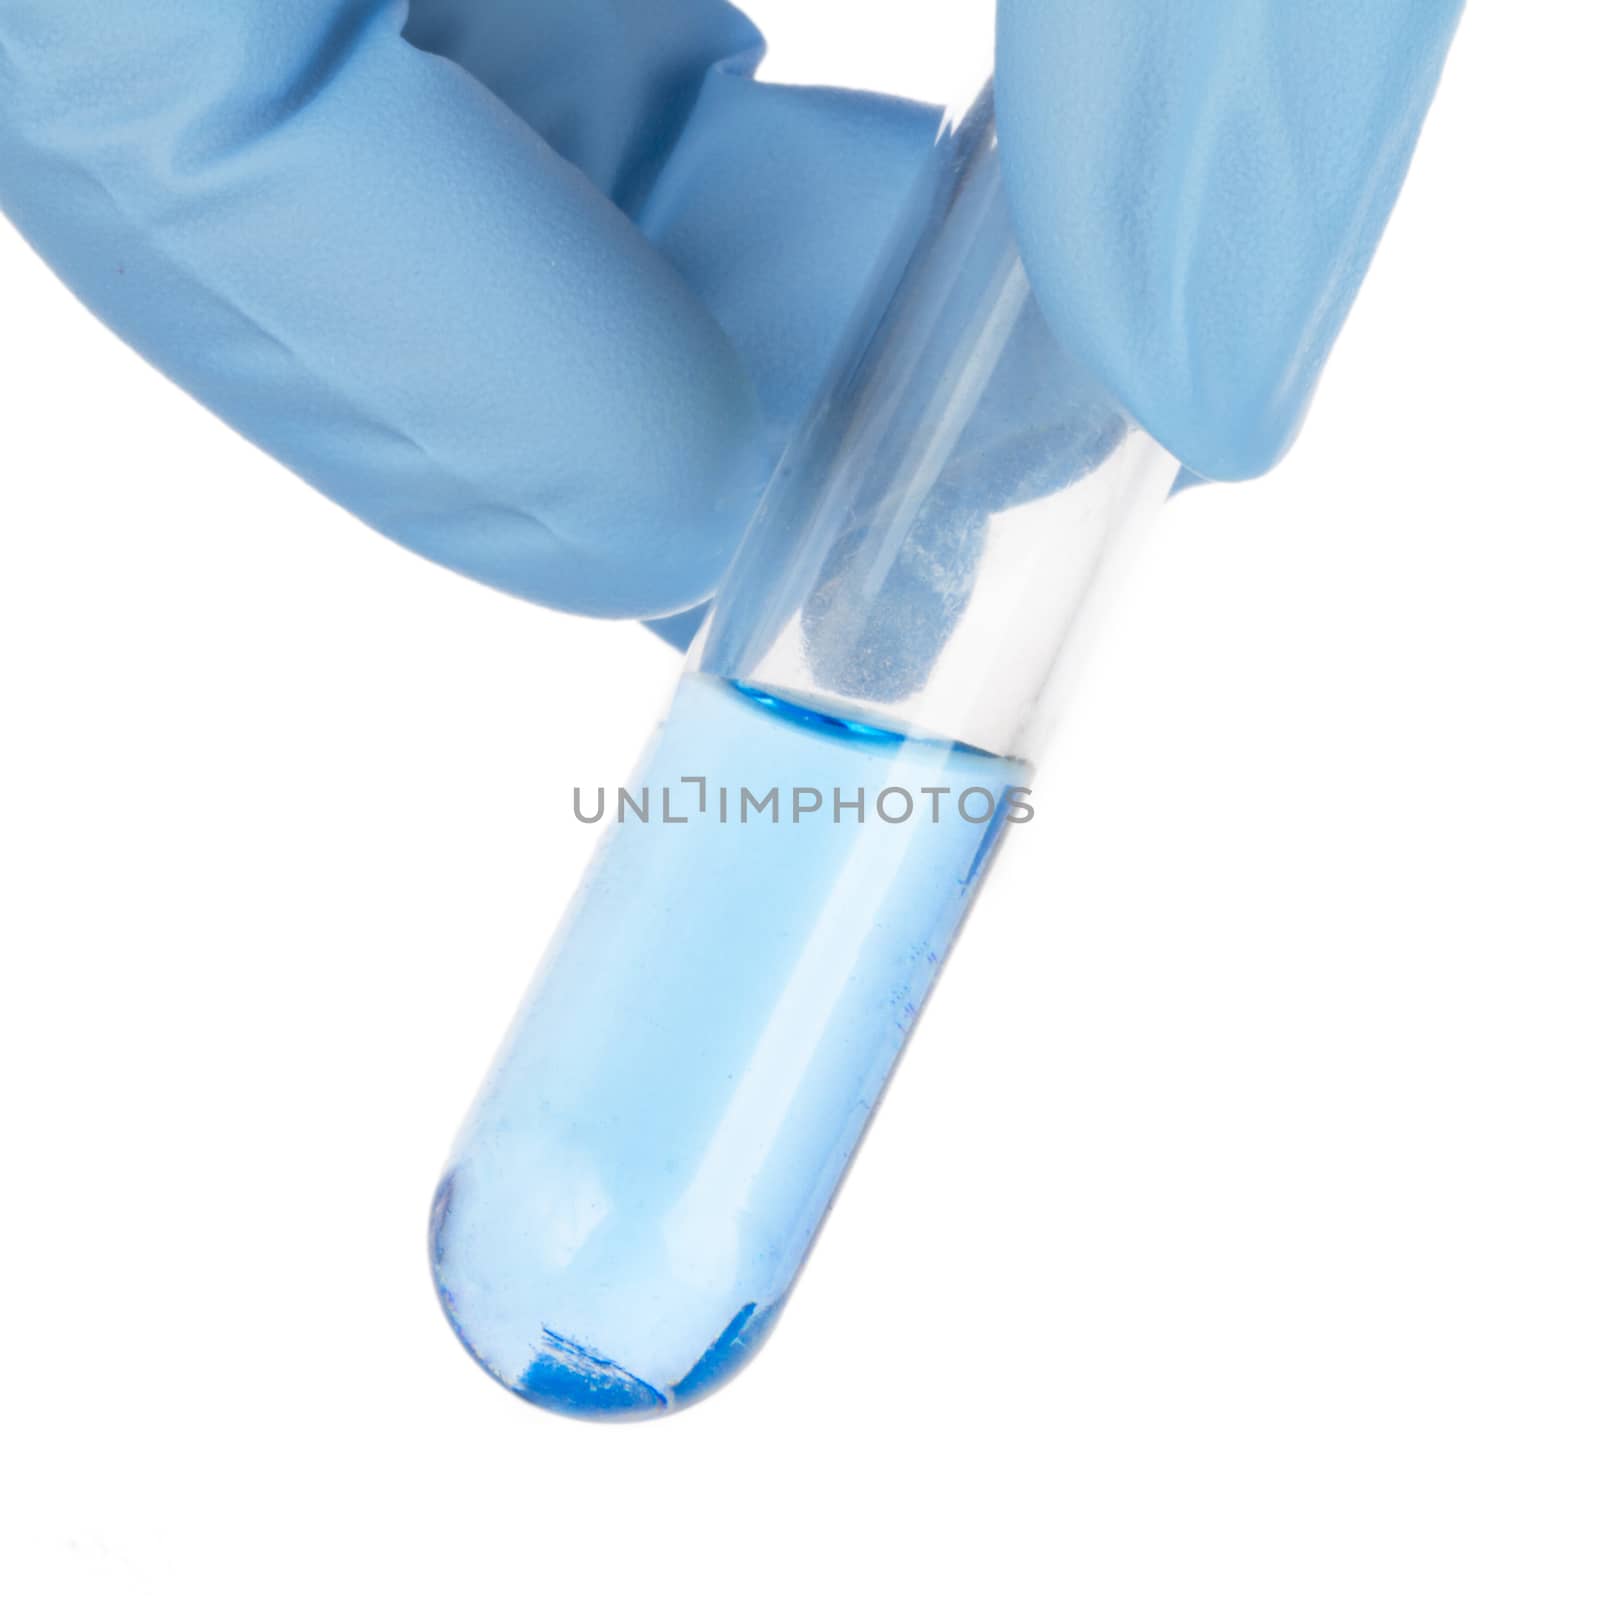 Fingers holding test tube with blue liquid.